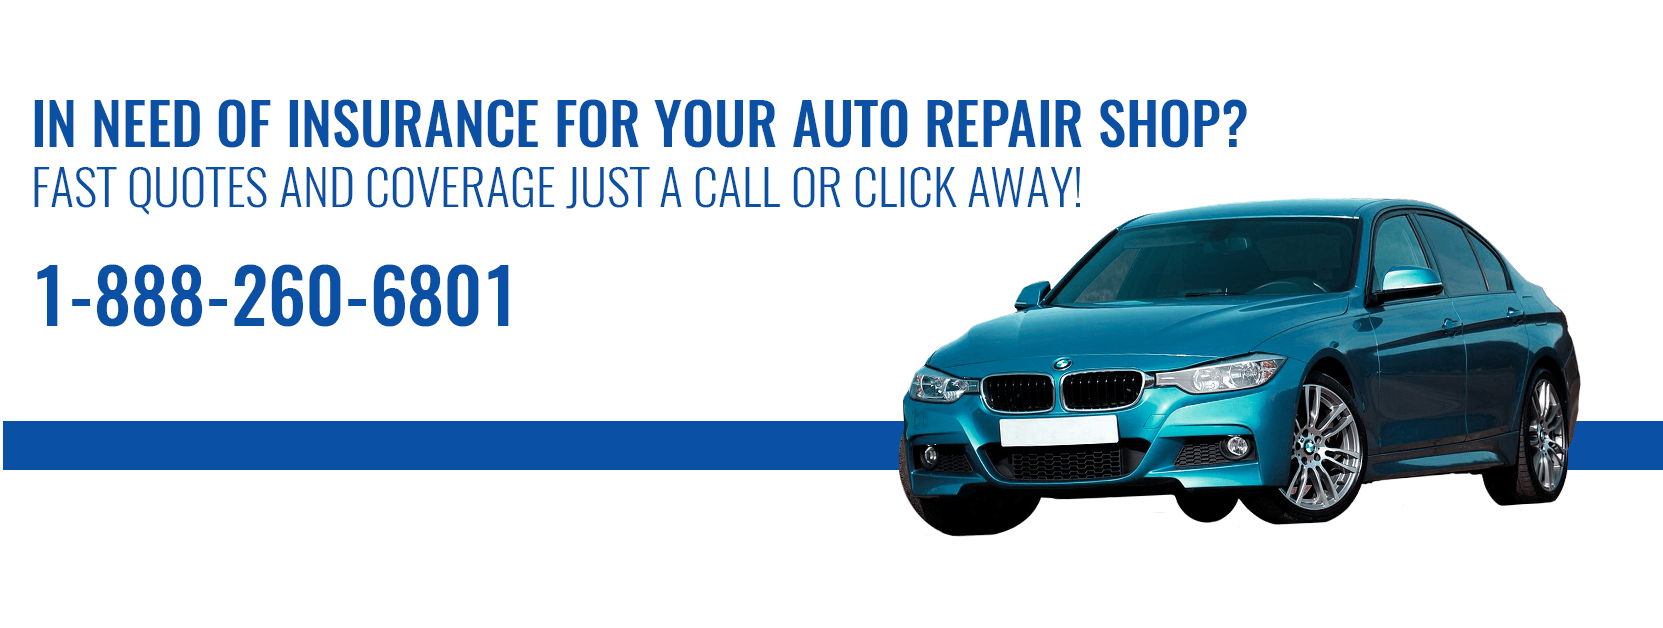 In Need of Insurance for your Auto Repair Shop?